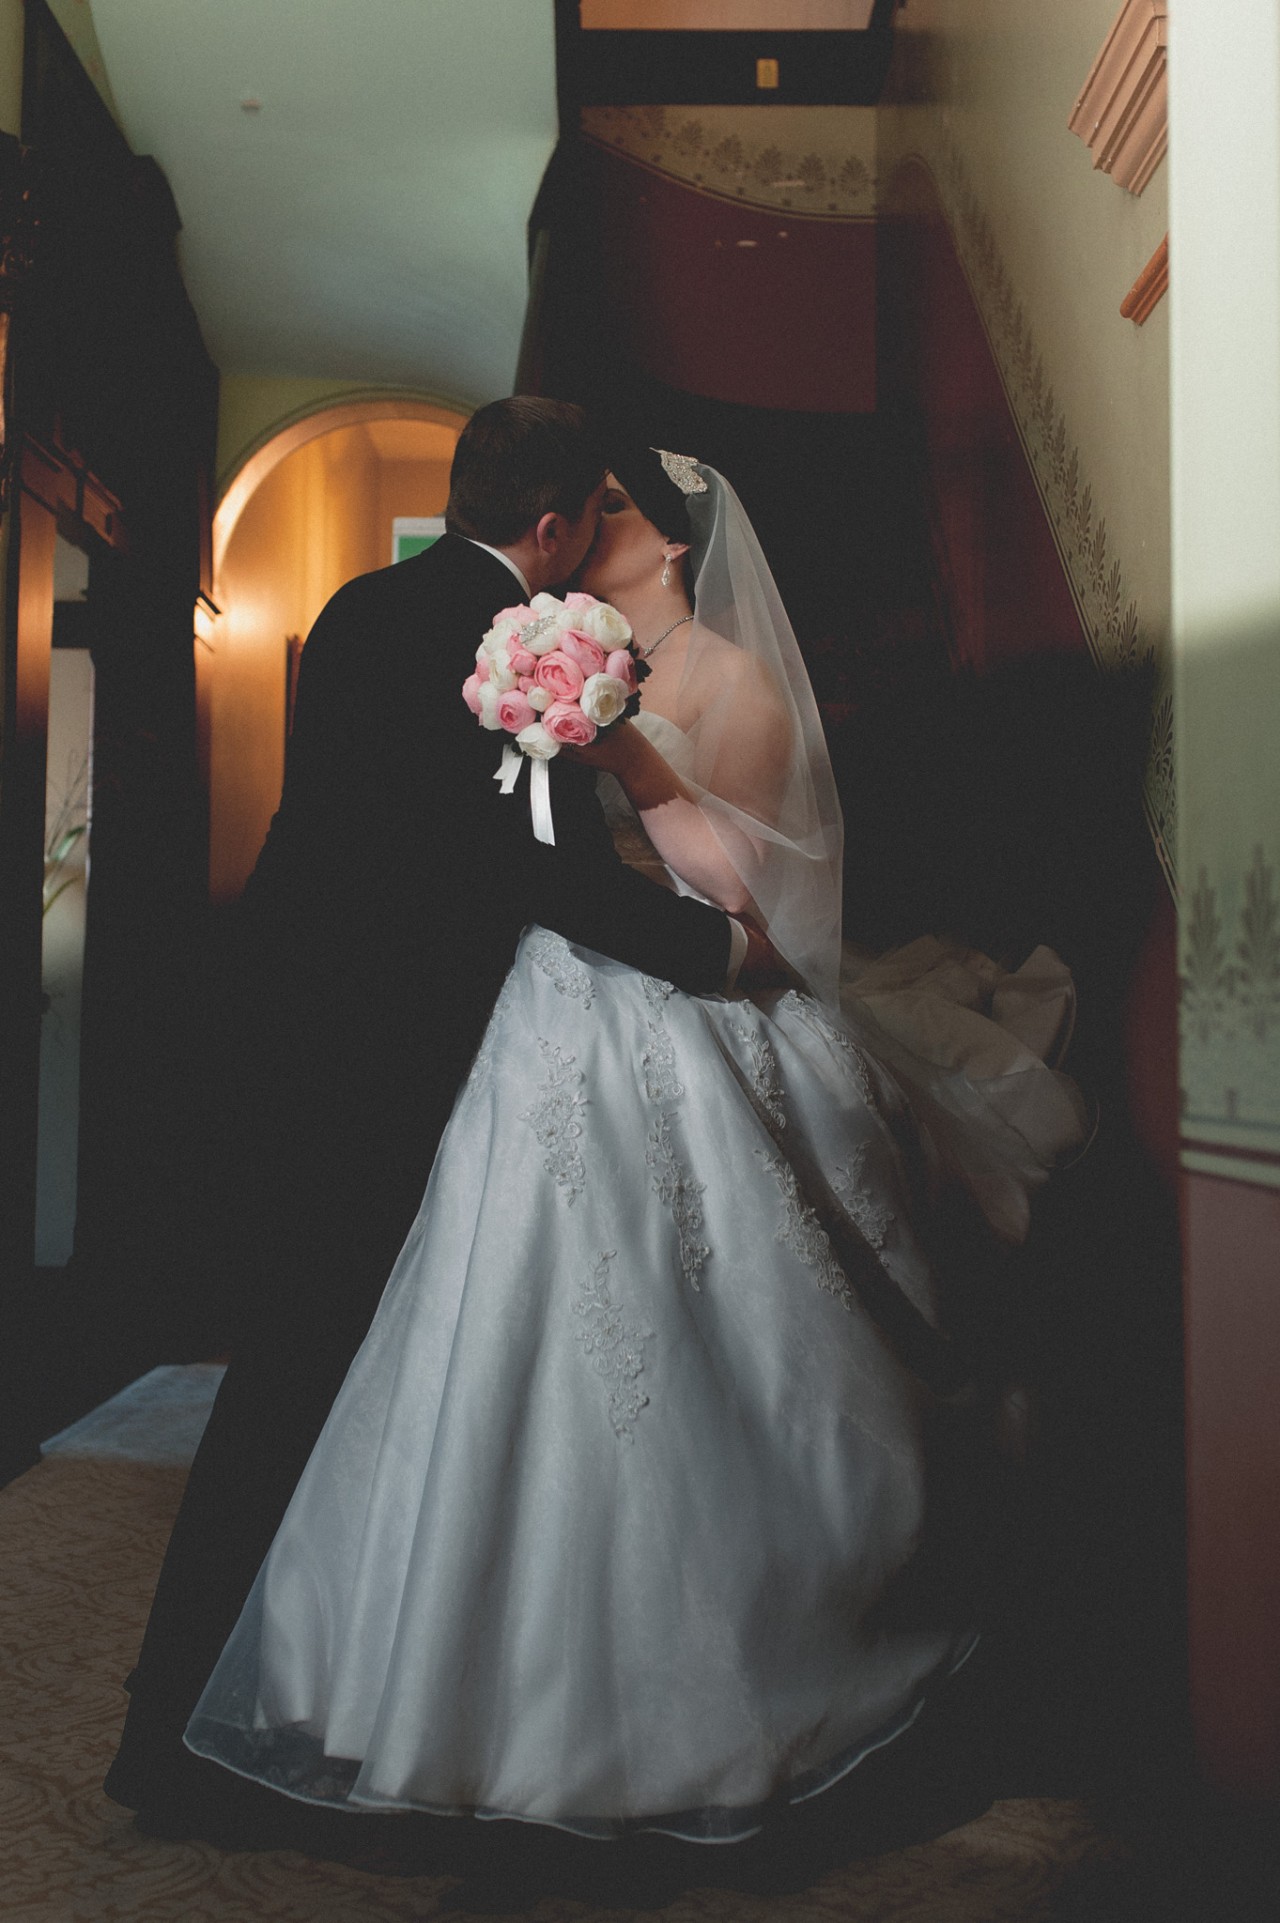 Bride and groom sharing a kiss by a staircase at Shafston House, Kangaroo Point